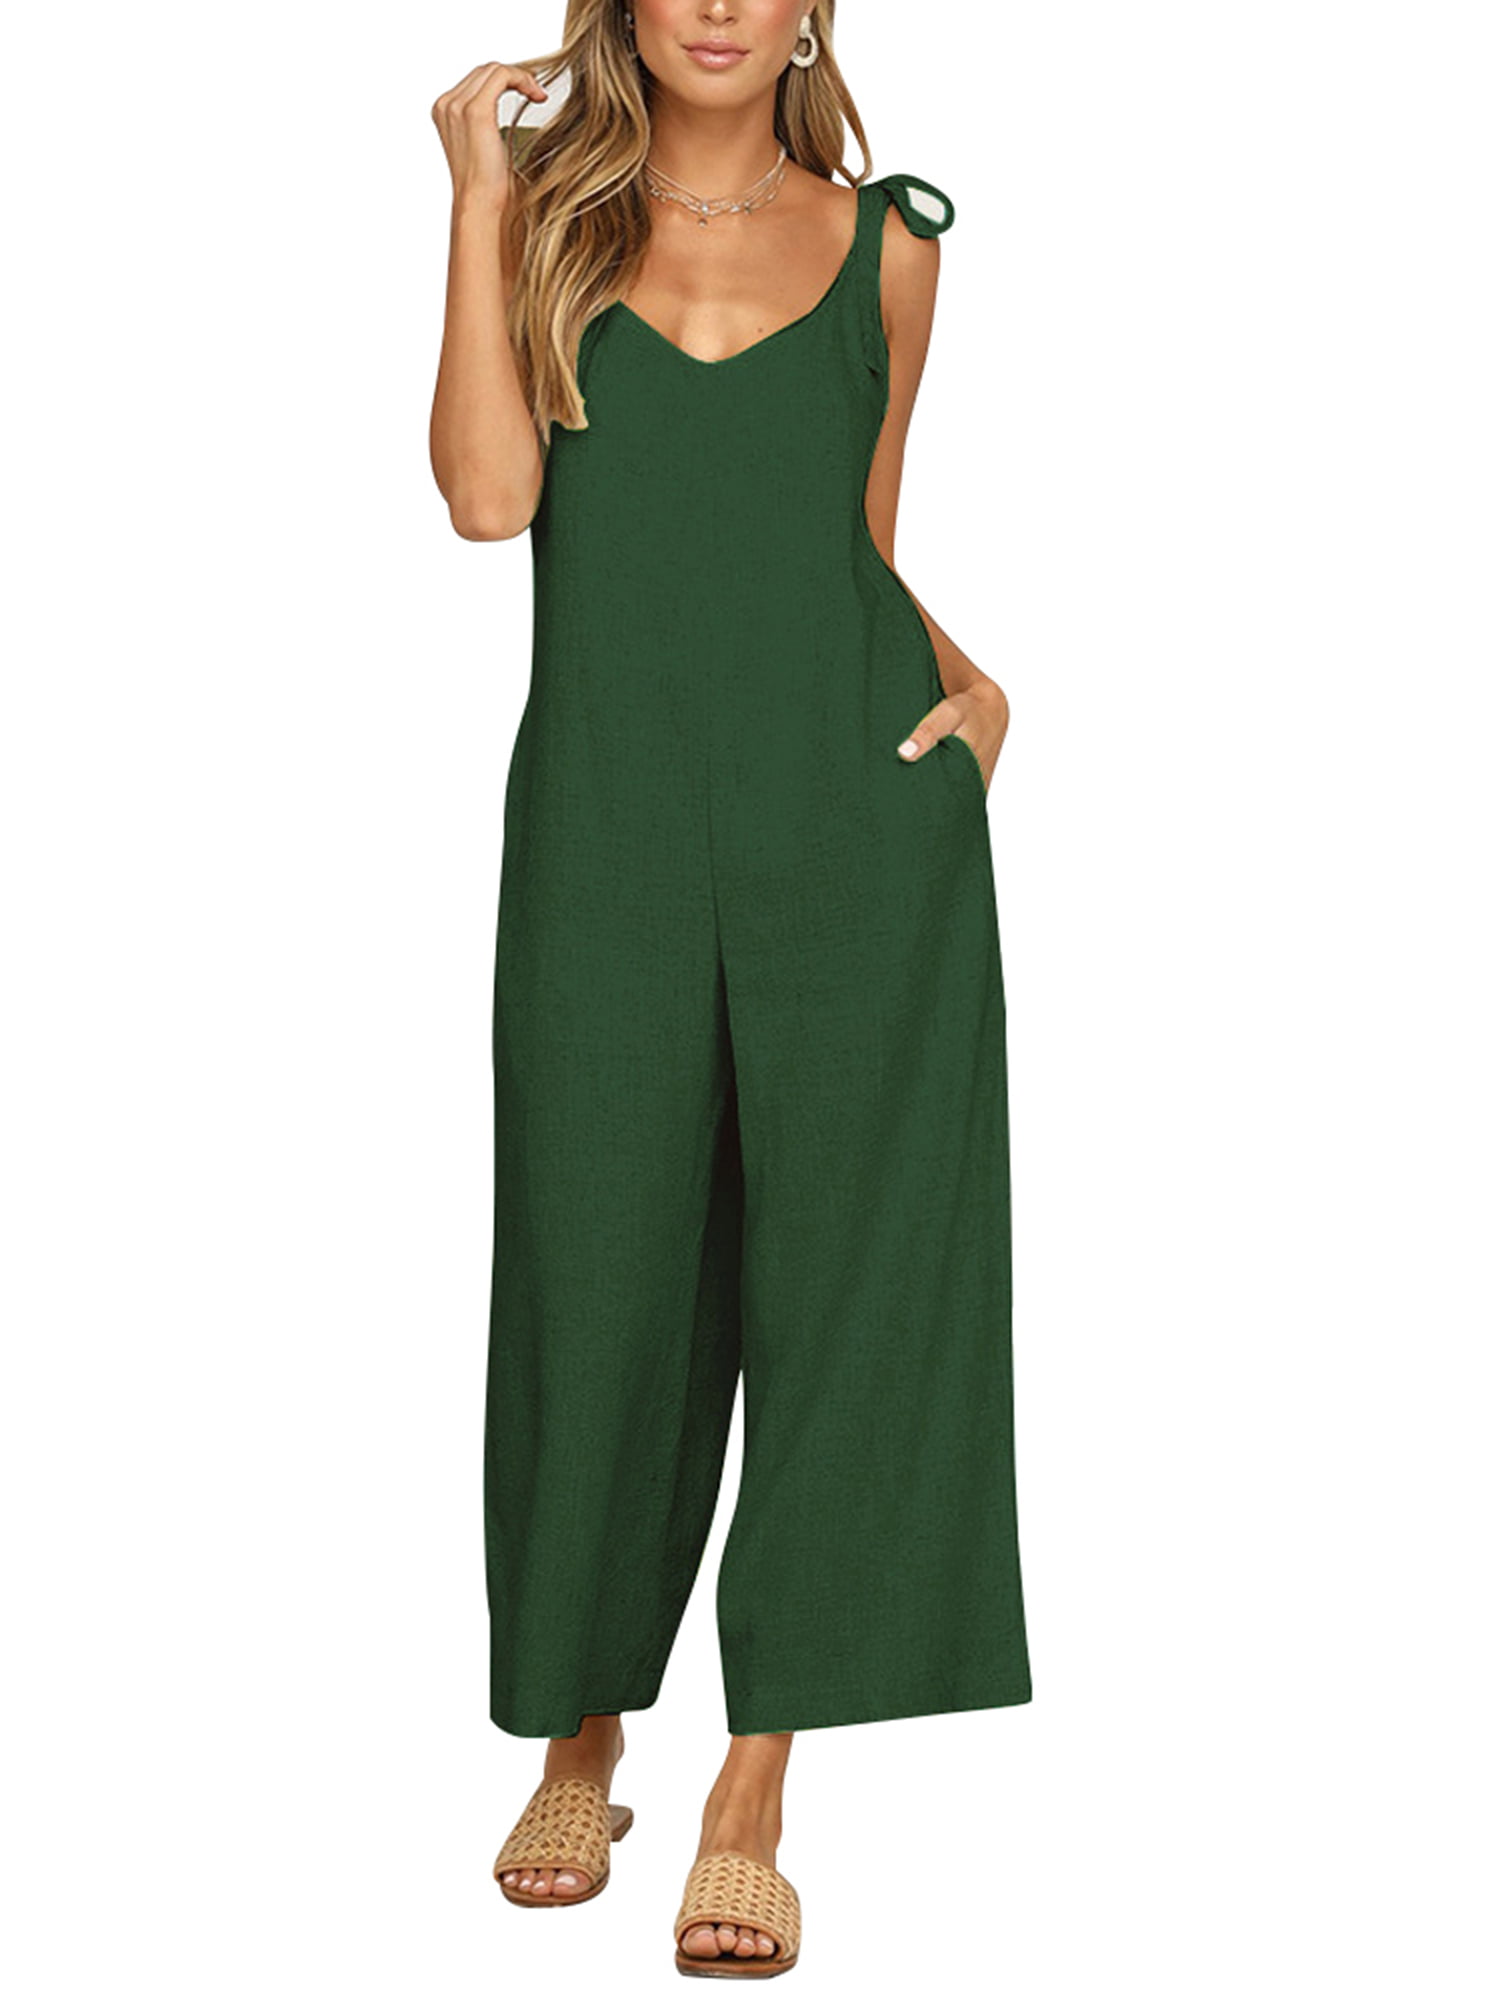 Keaac Womens Jumpsuits Casual Overalls Loose Fit Spaghetti Strap Rompers